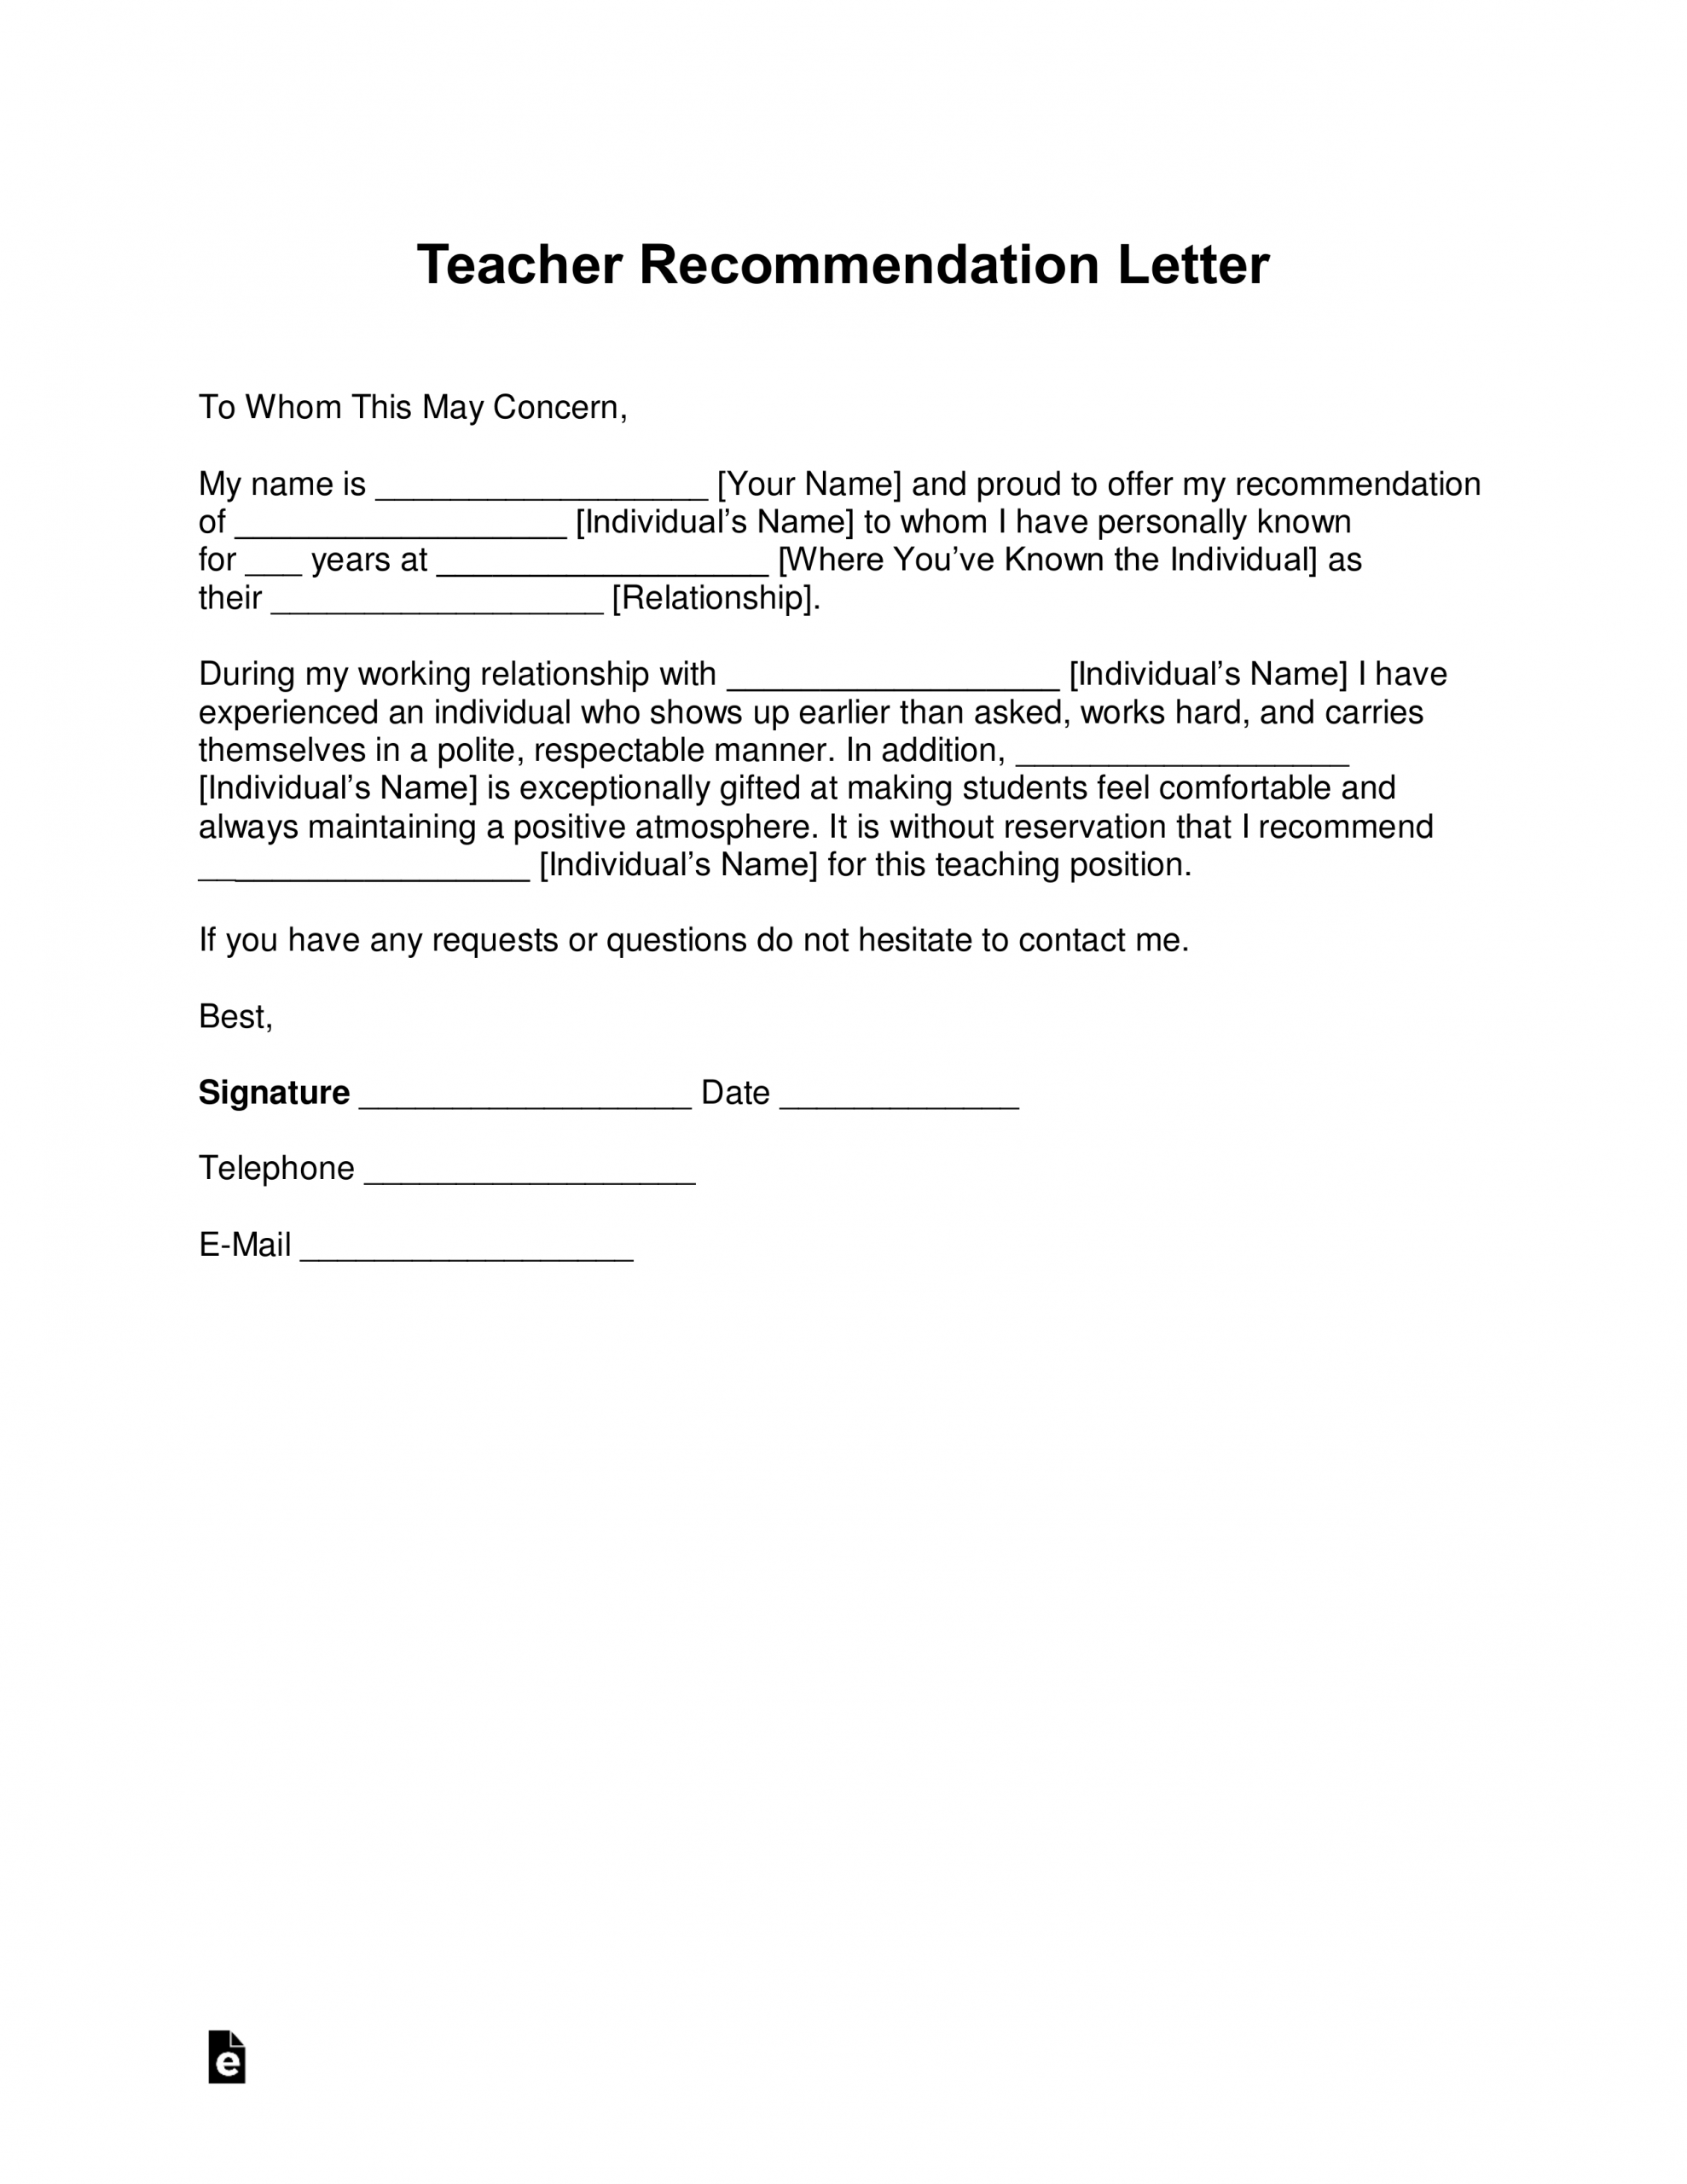 Free Teacher Recommendation Letter Template With Samples intended for size 2550 X 3301